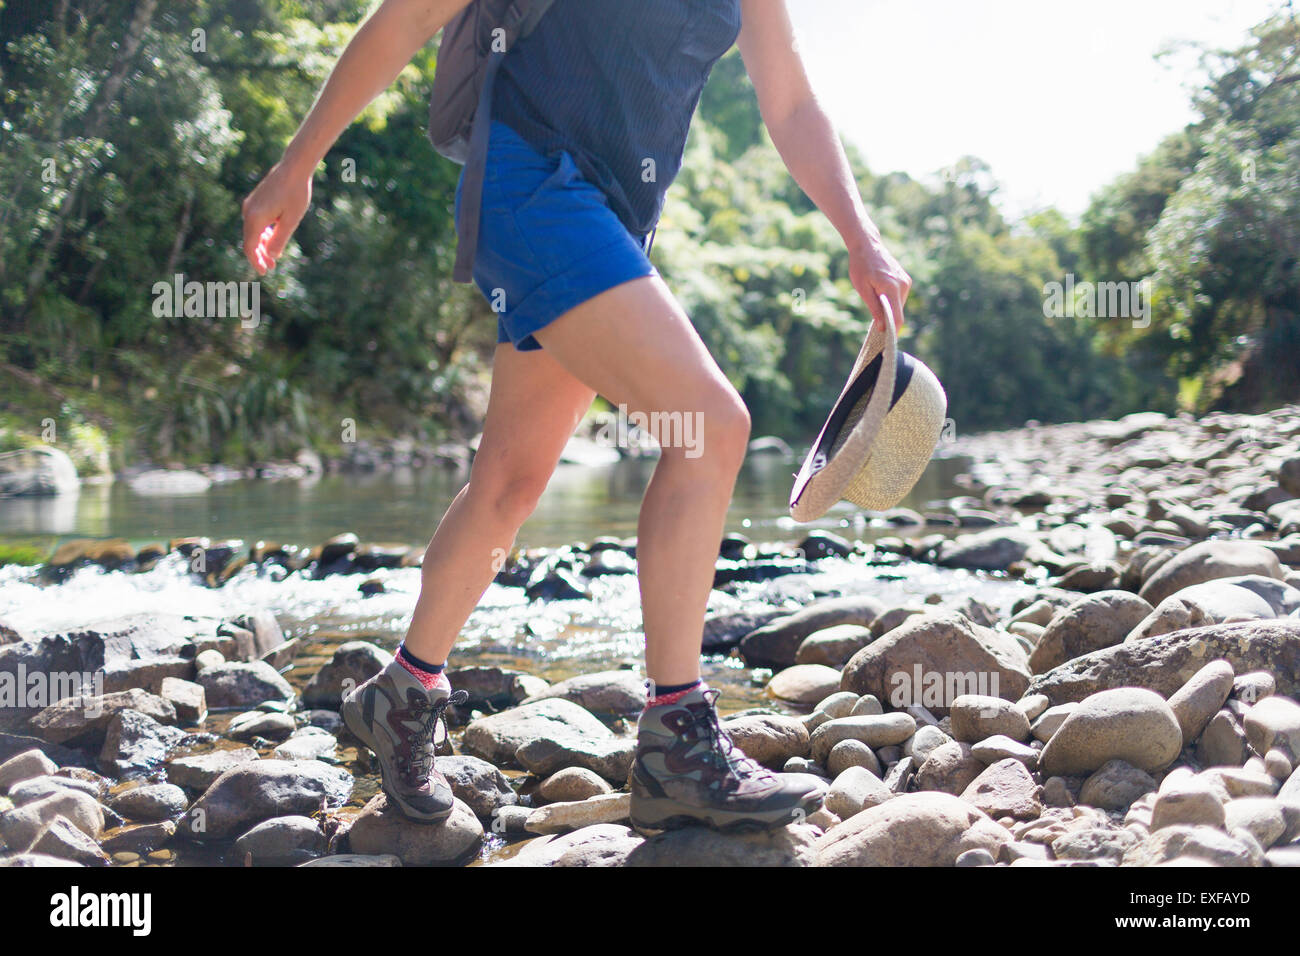 Hiker walking among stones in shallow stream, Waima Forest, North Island, NZ Stock Photo